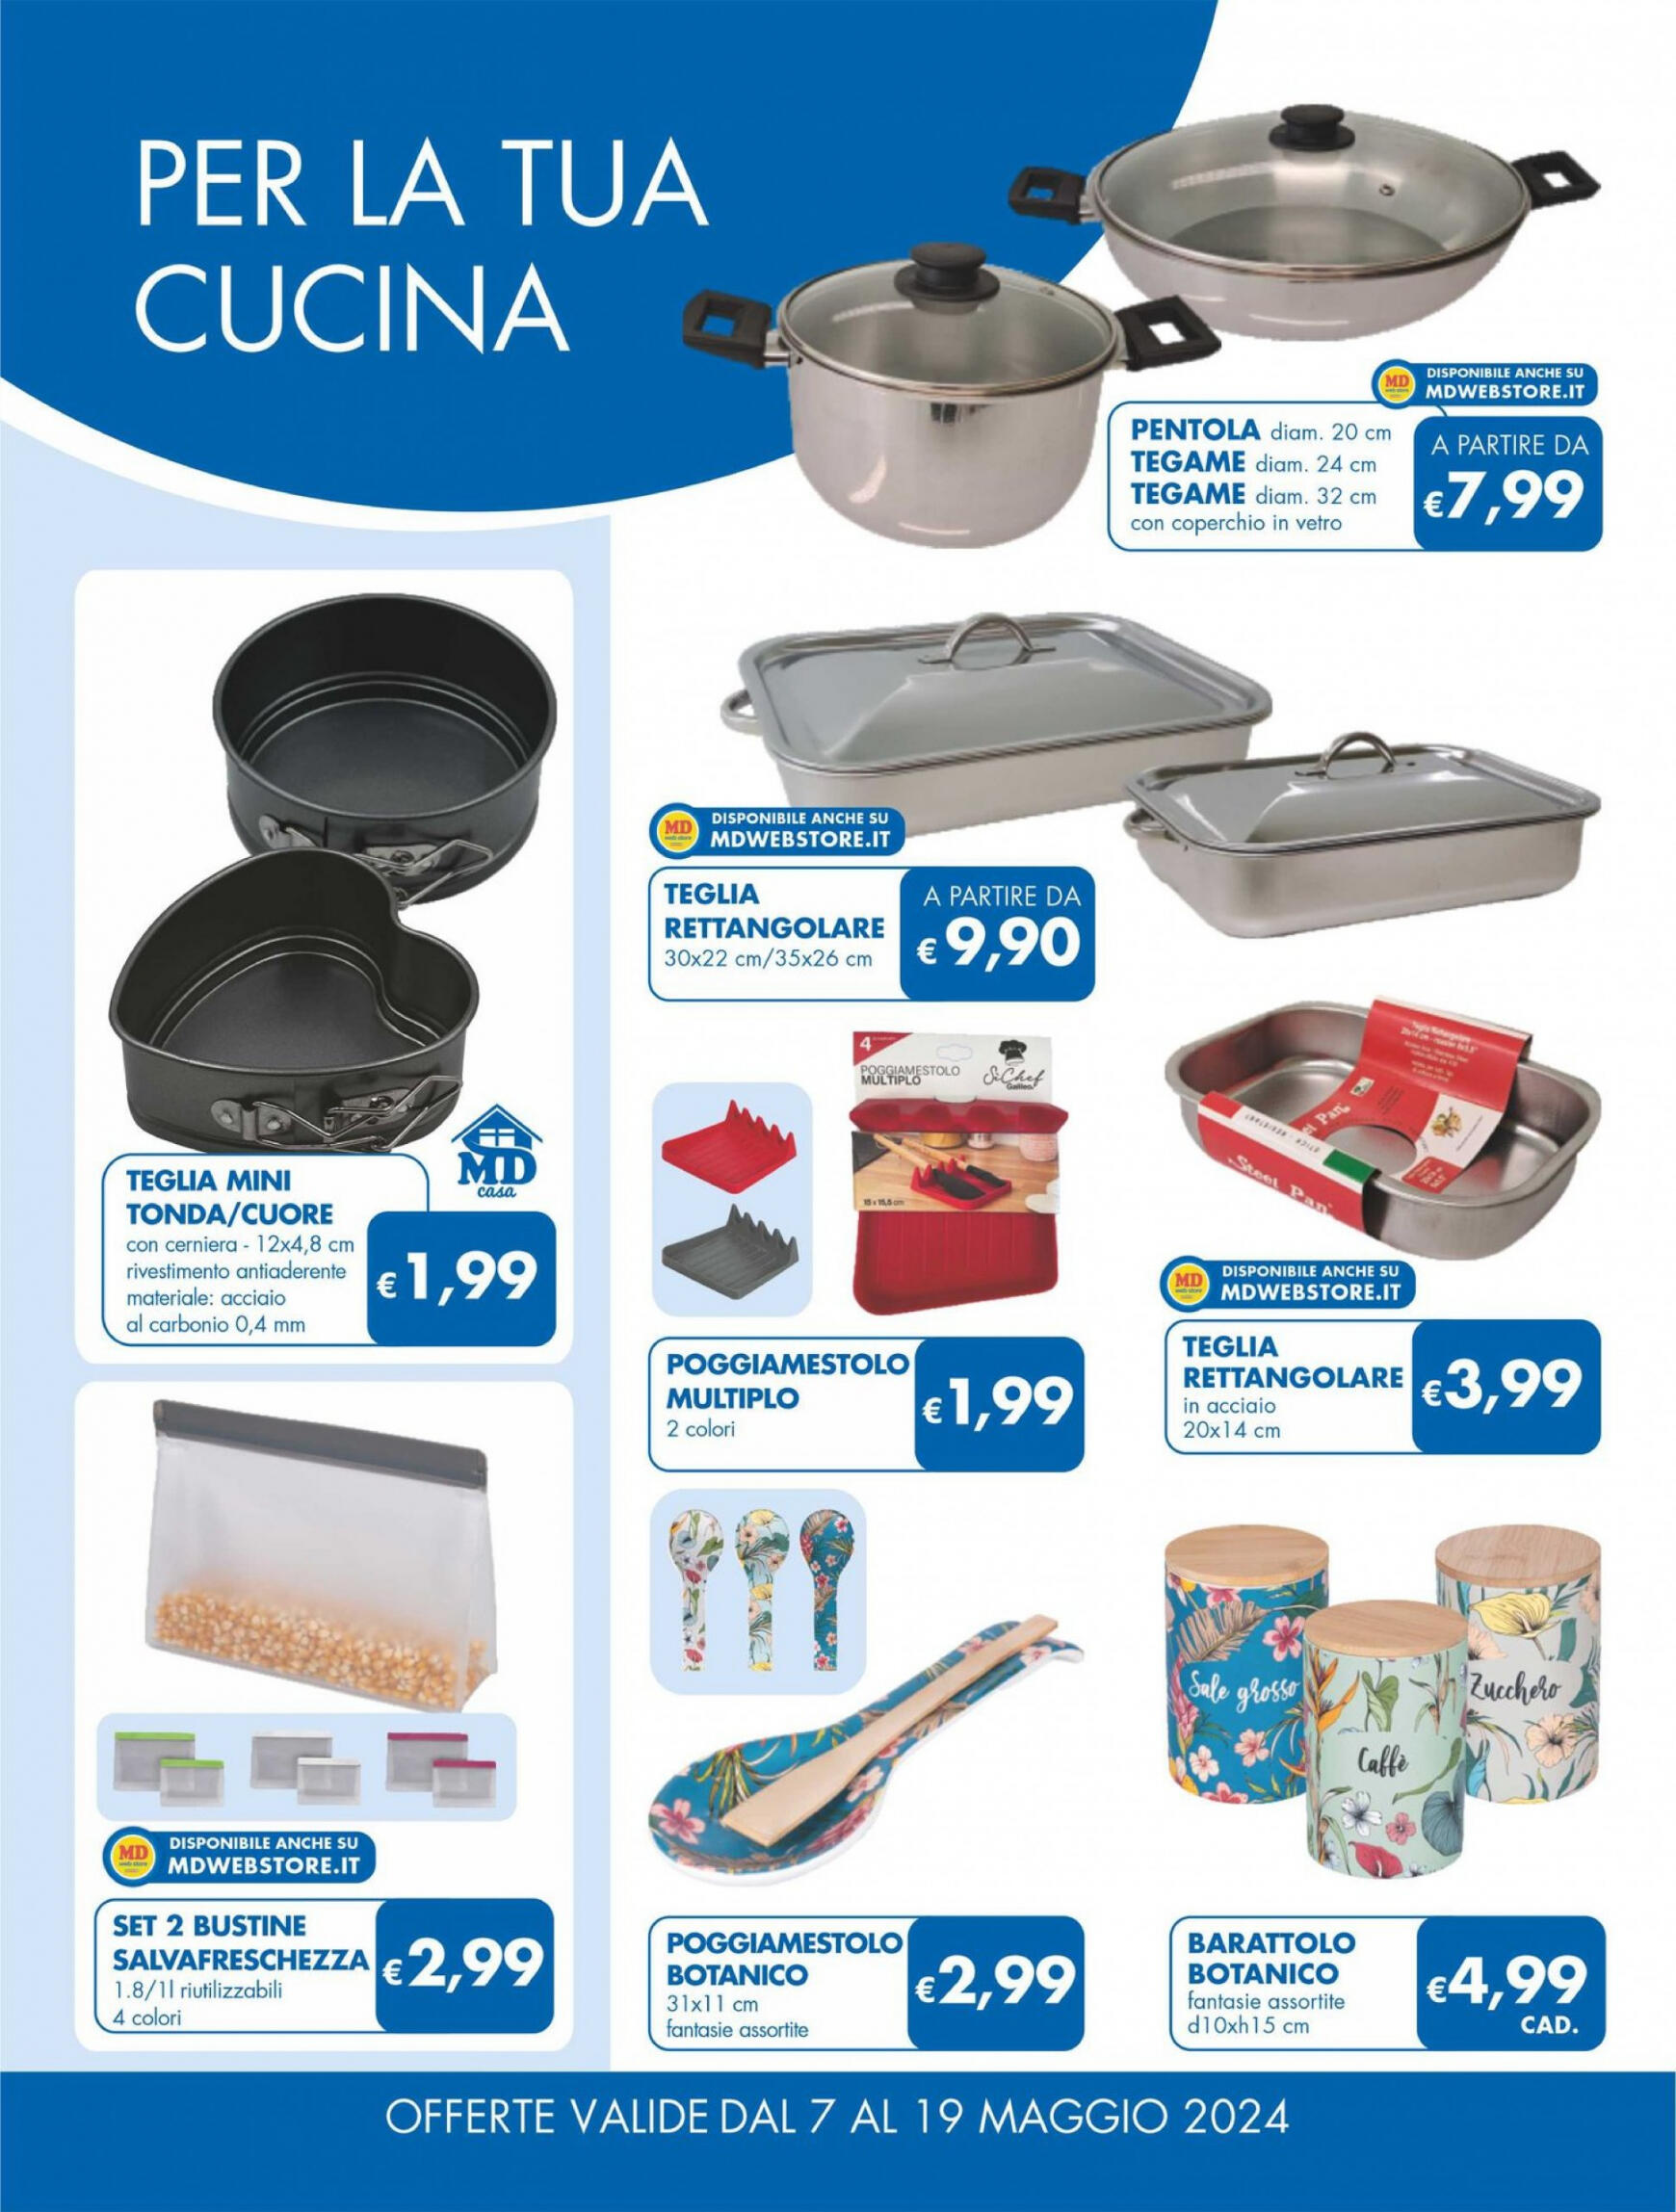 md-discount - Nuovo volantino MD - MD Discount 07.05. - 19.05. - page: 21